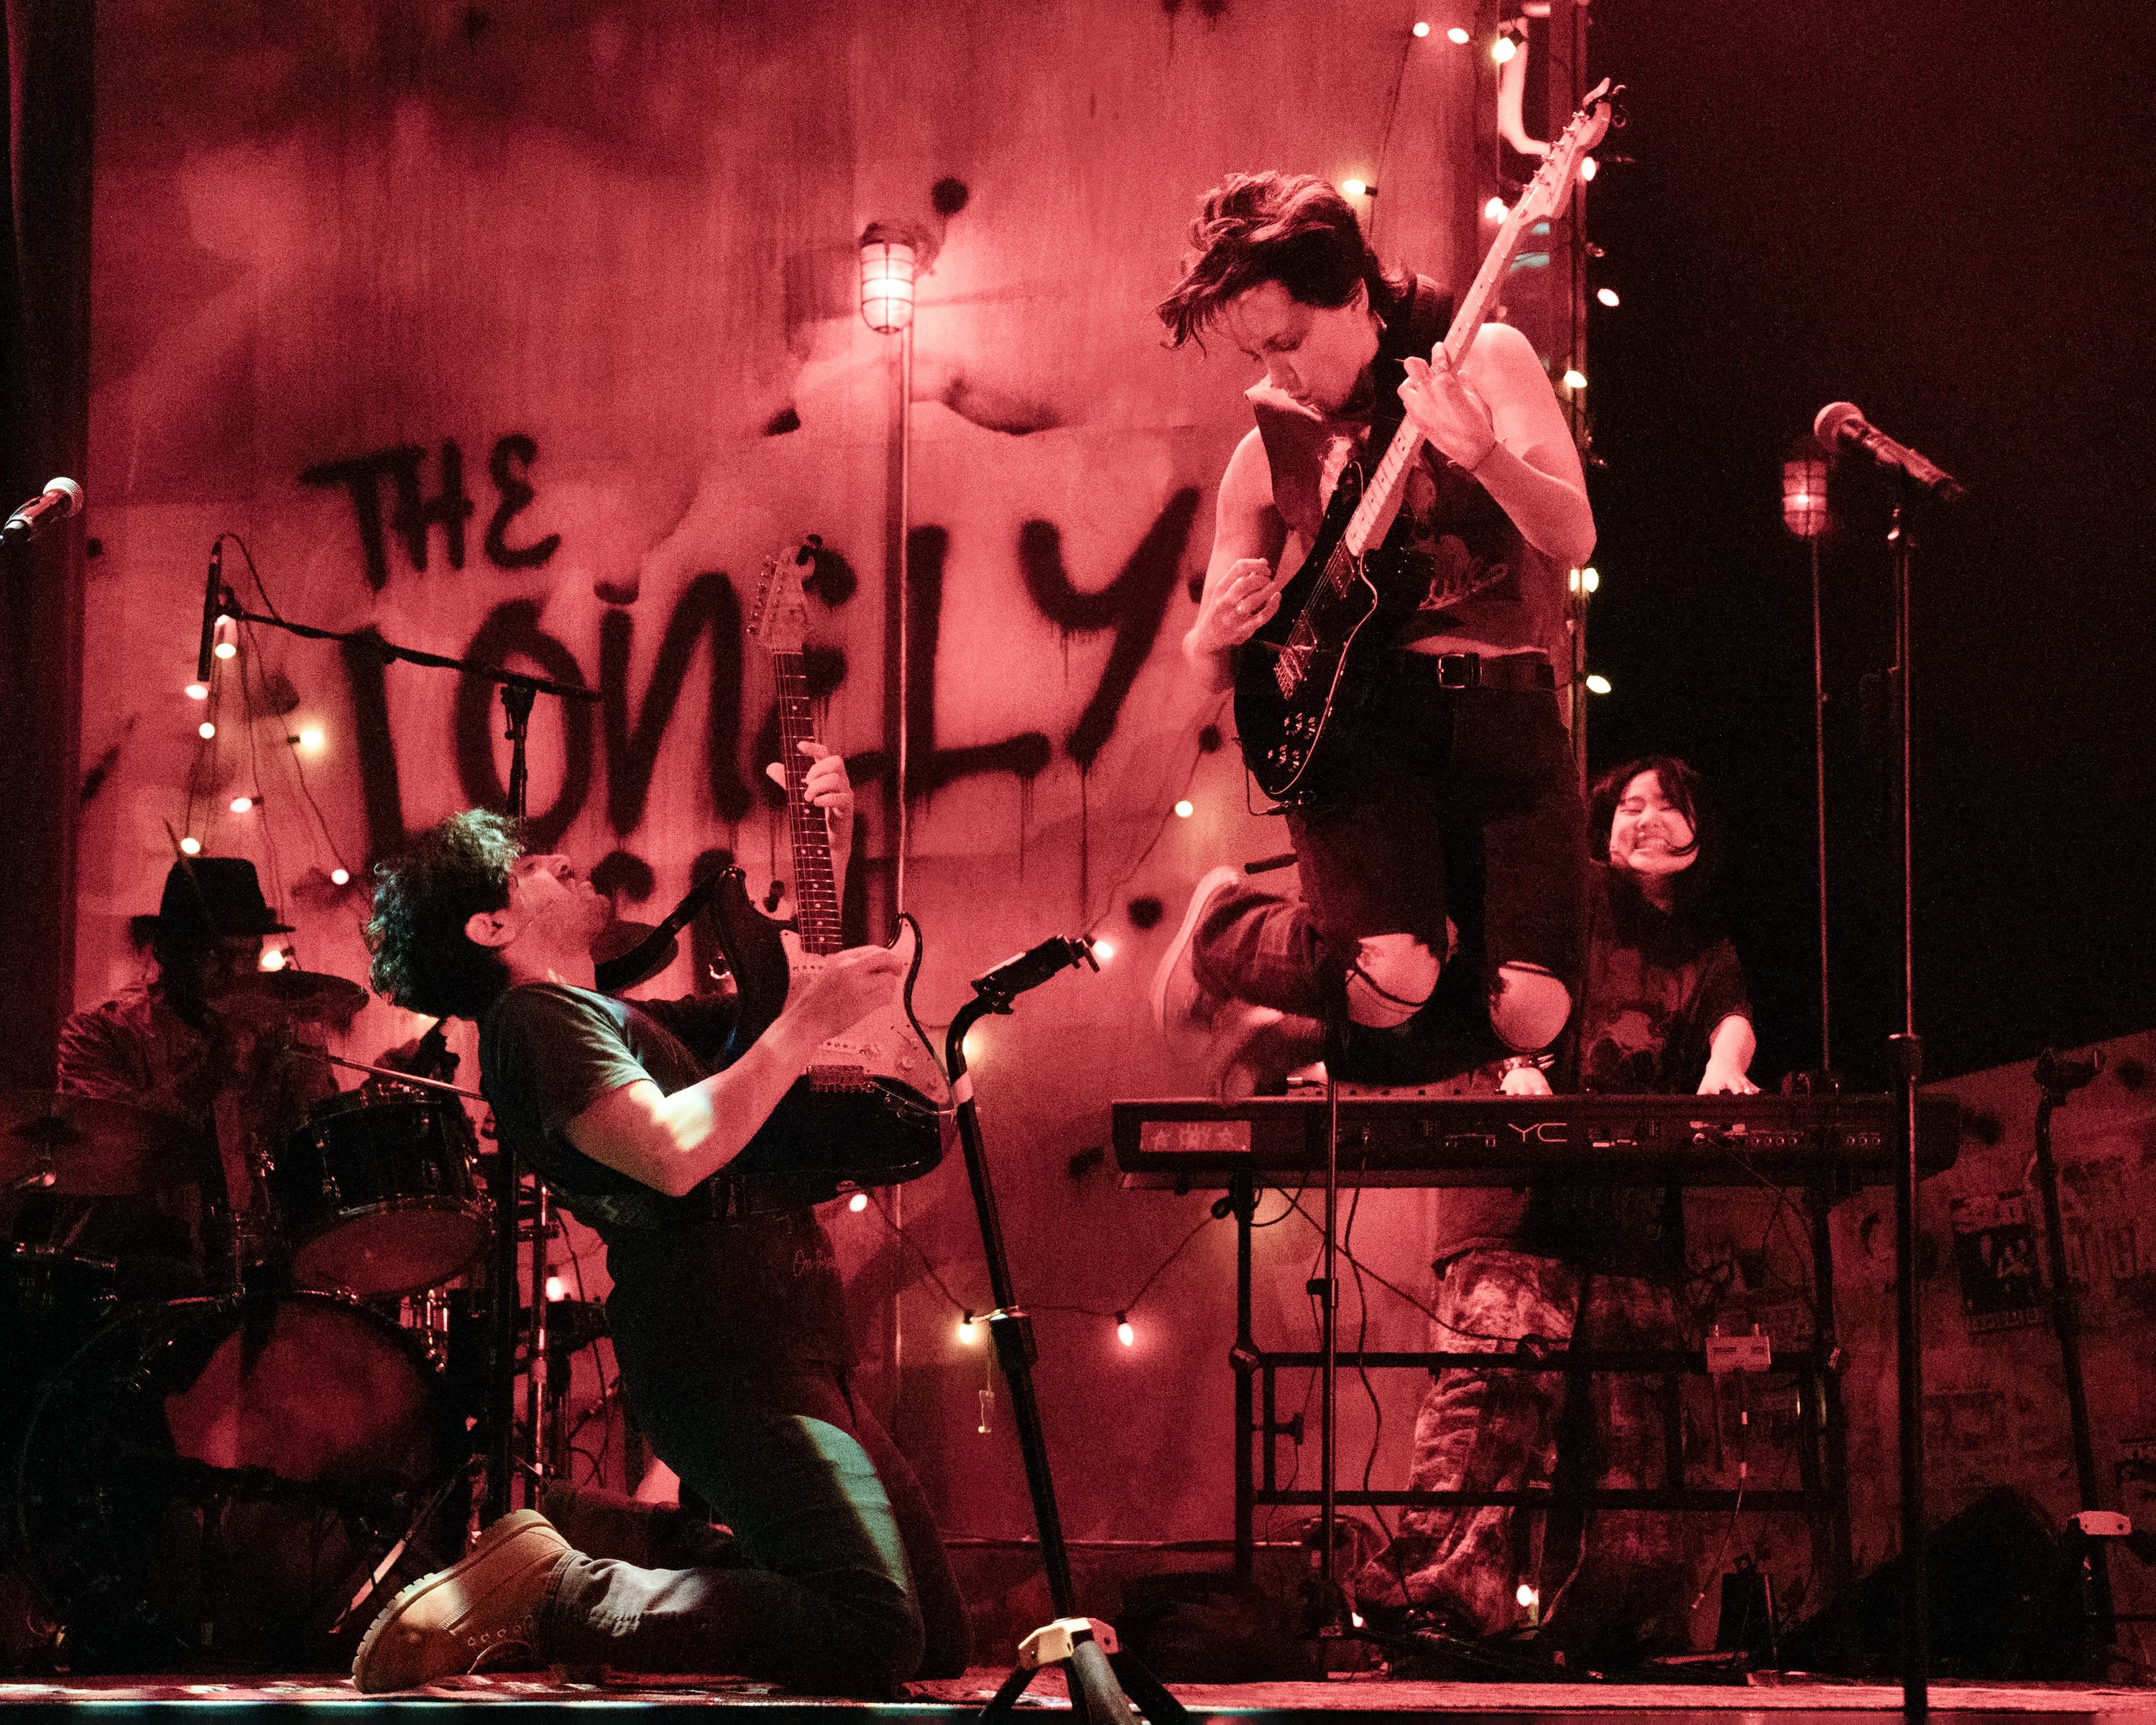 Review: ‘The Lonely Few’ Mixes Bona Fide Rock Concert With Angsty Love Story